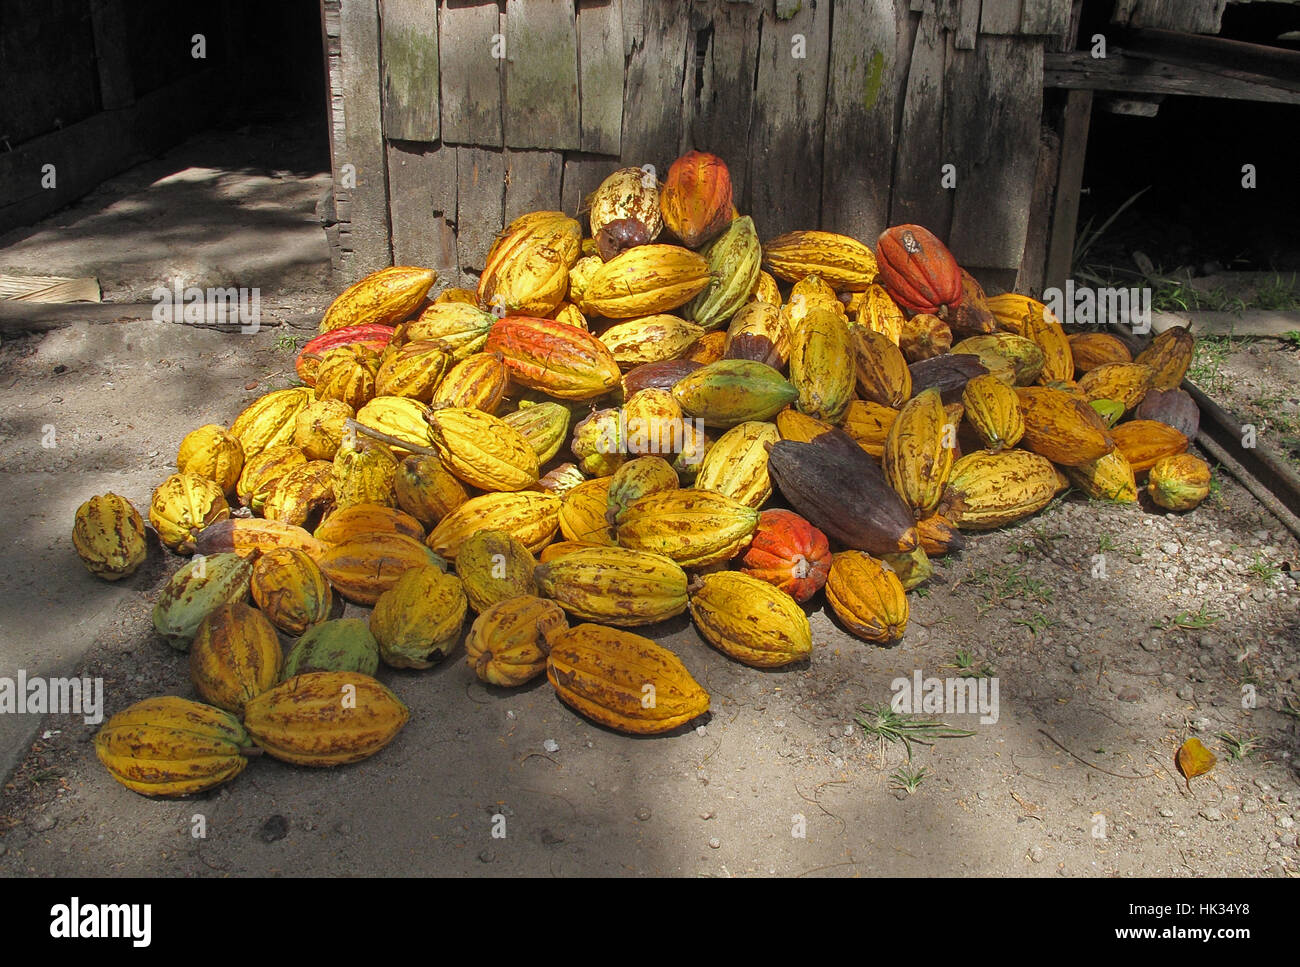 Cocoa (Theobroma cacao) harvested pods  Fond Doux plantation, St Lucia, Lesser Antilles       December Stock Photo